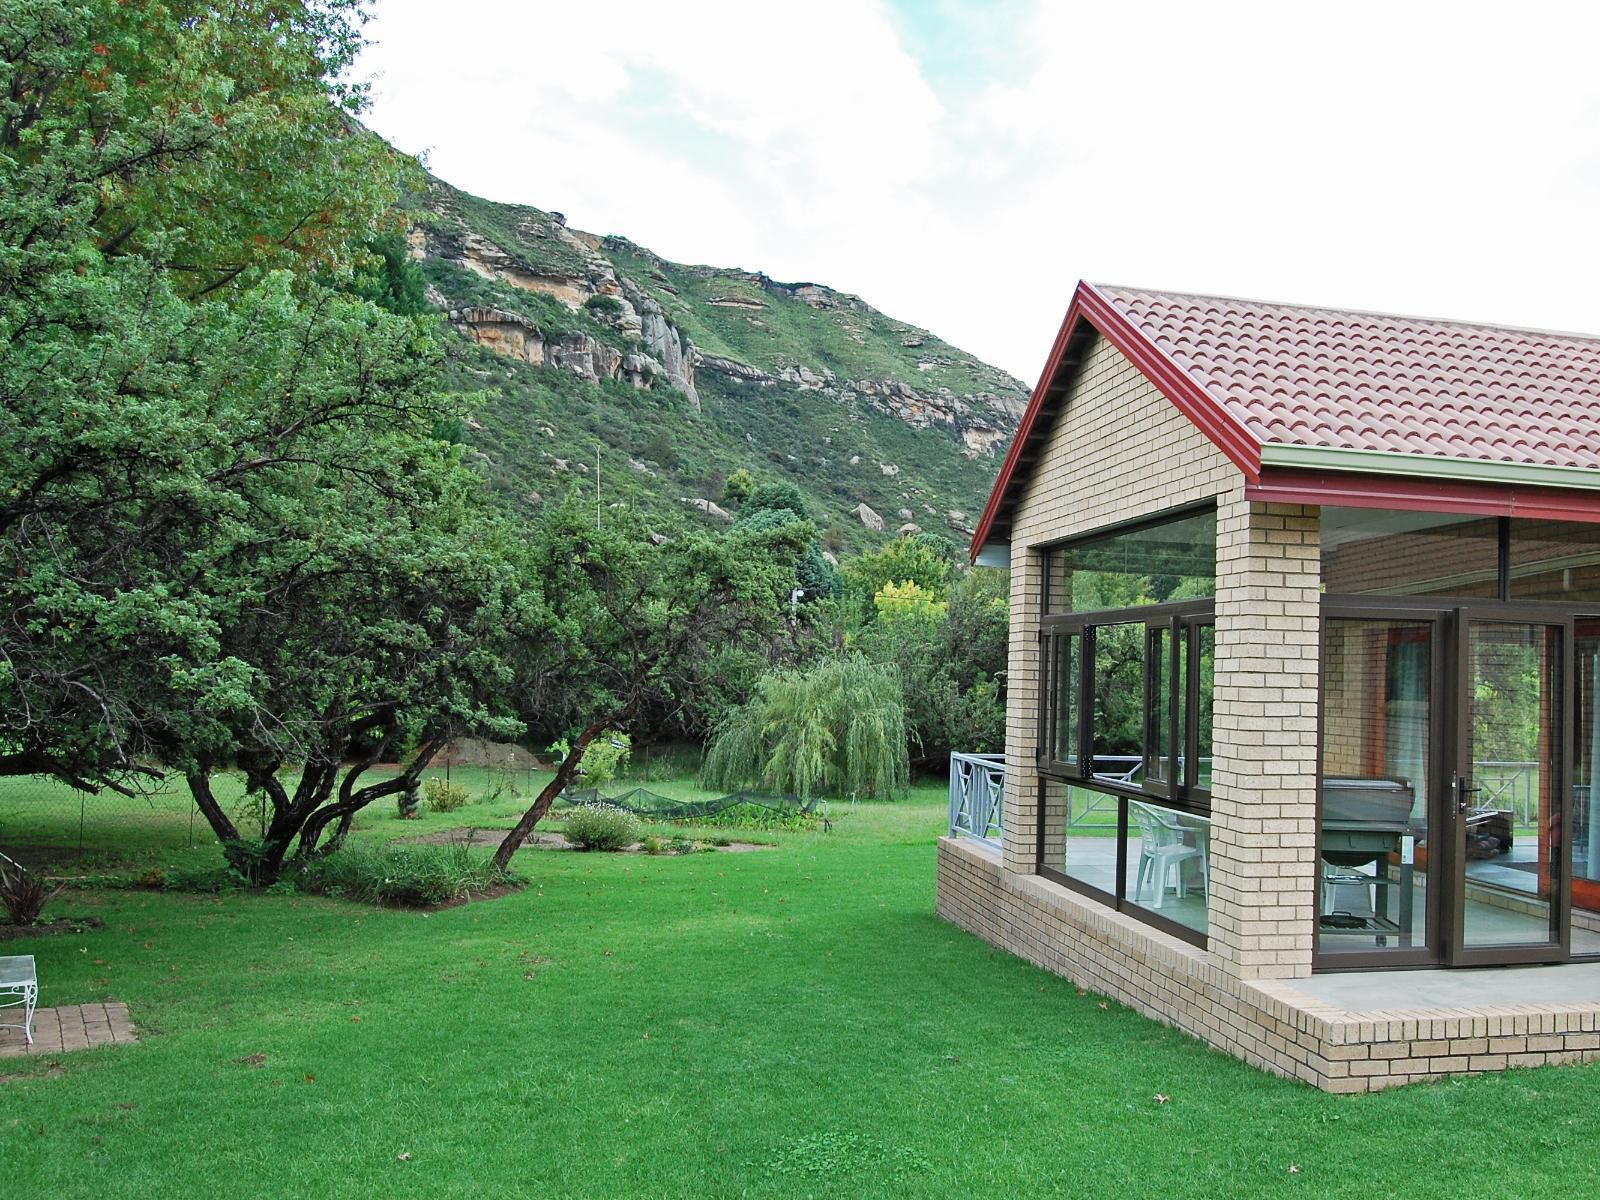 Stonehaven Clarens Clarens Free State South Africa House, Building, Architecture, Highland, Nature